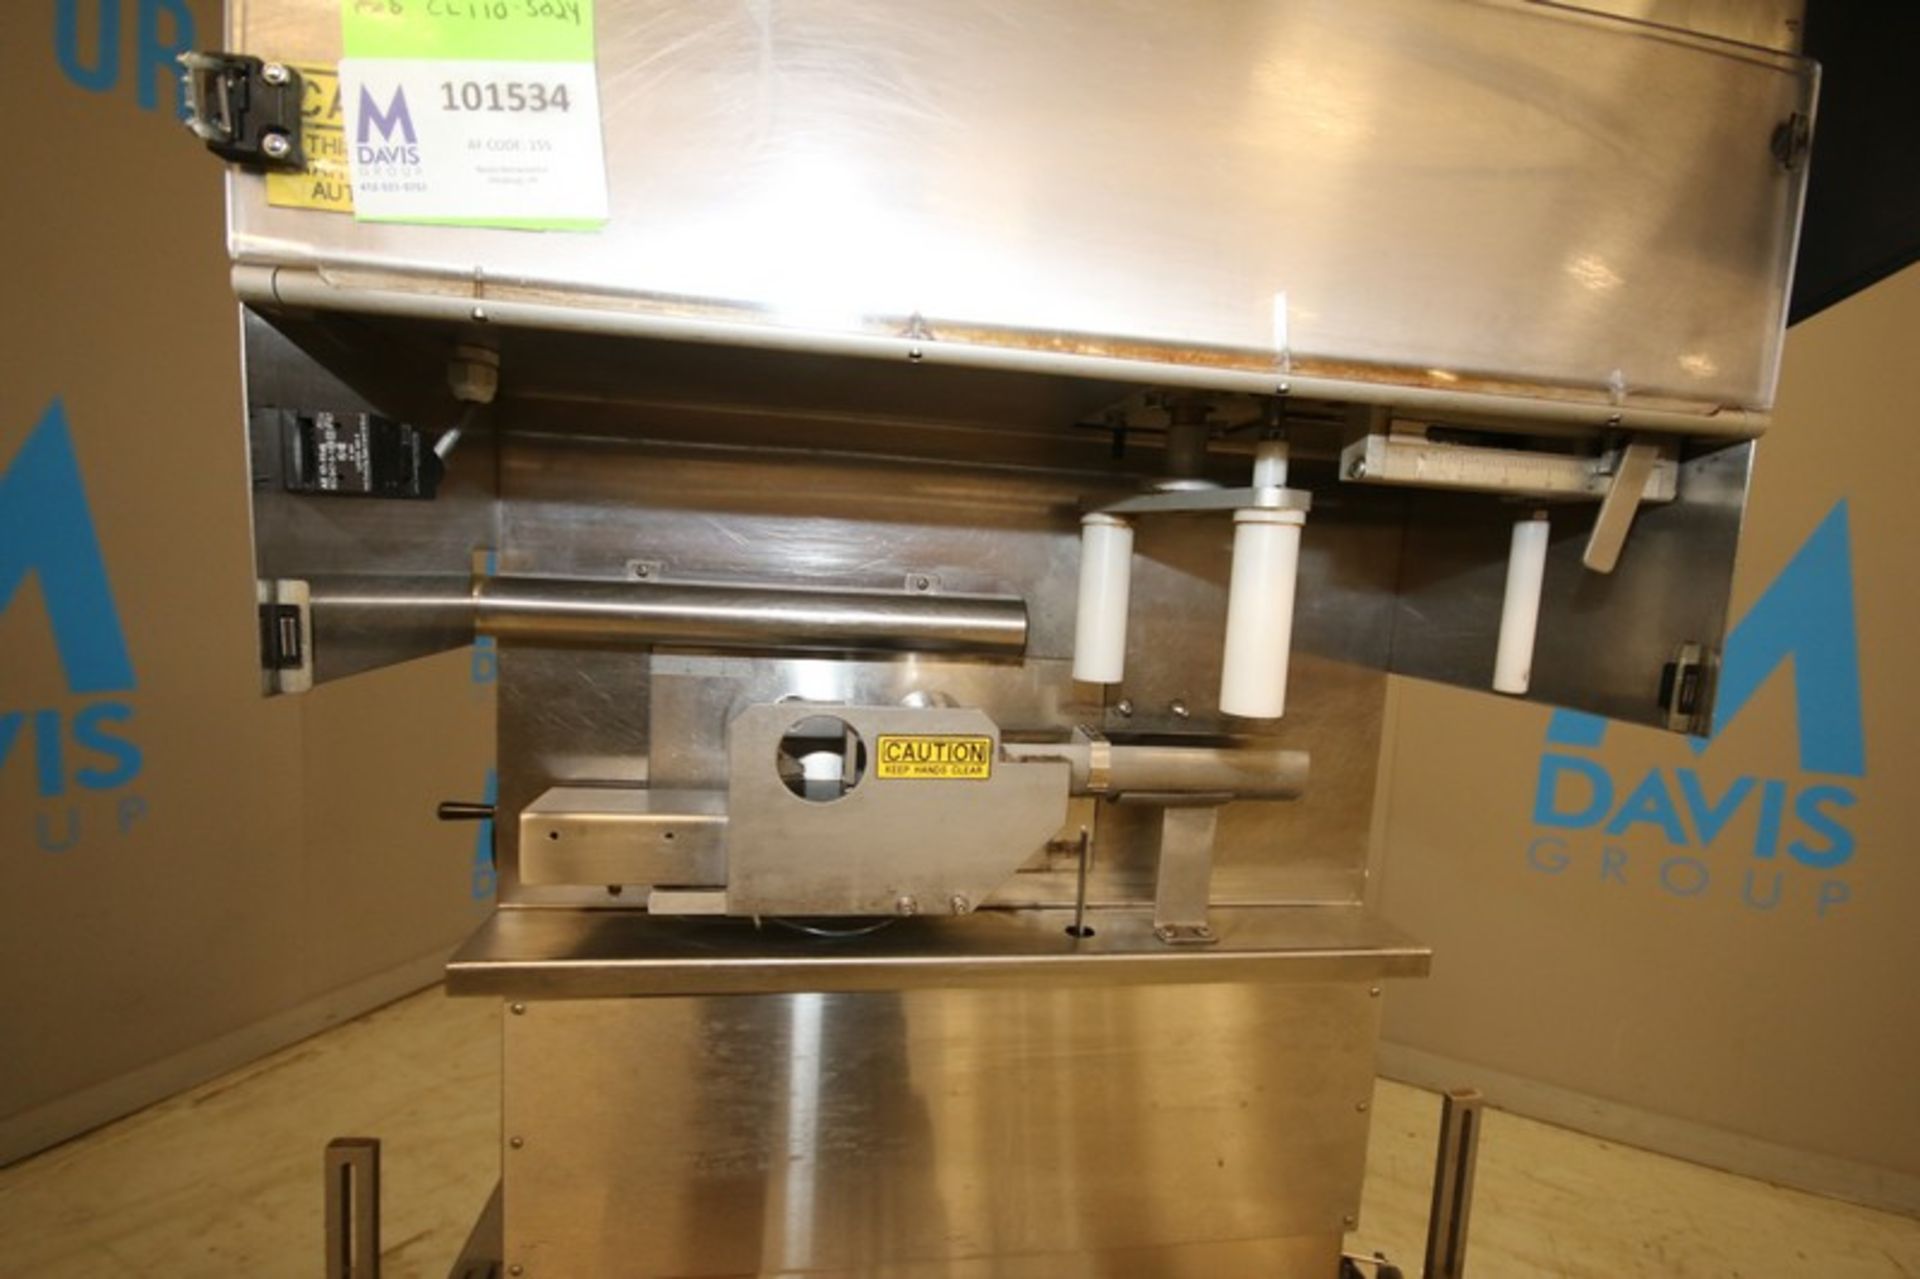 NJM / CLI S/S Fully Automatic Cottoner, Model CL-110-S024, SN 09735-05, with Siemens TD200 - Bild 2 aus 9